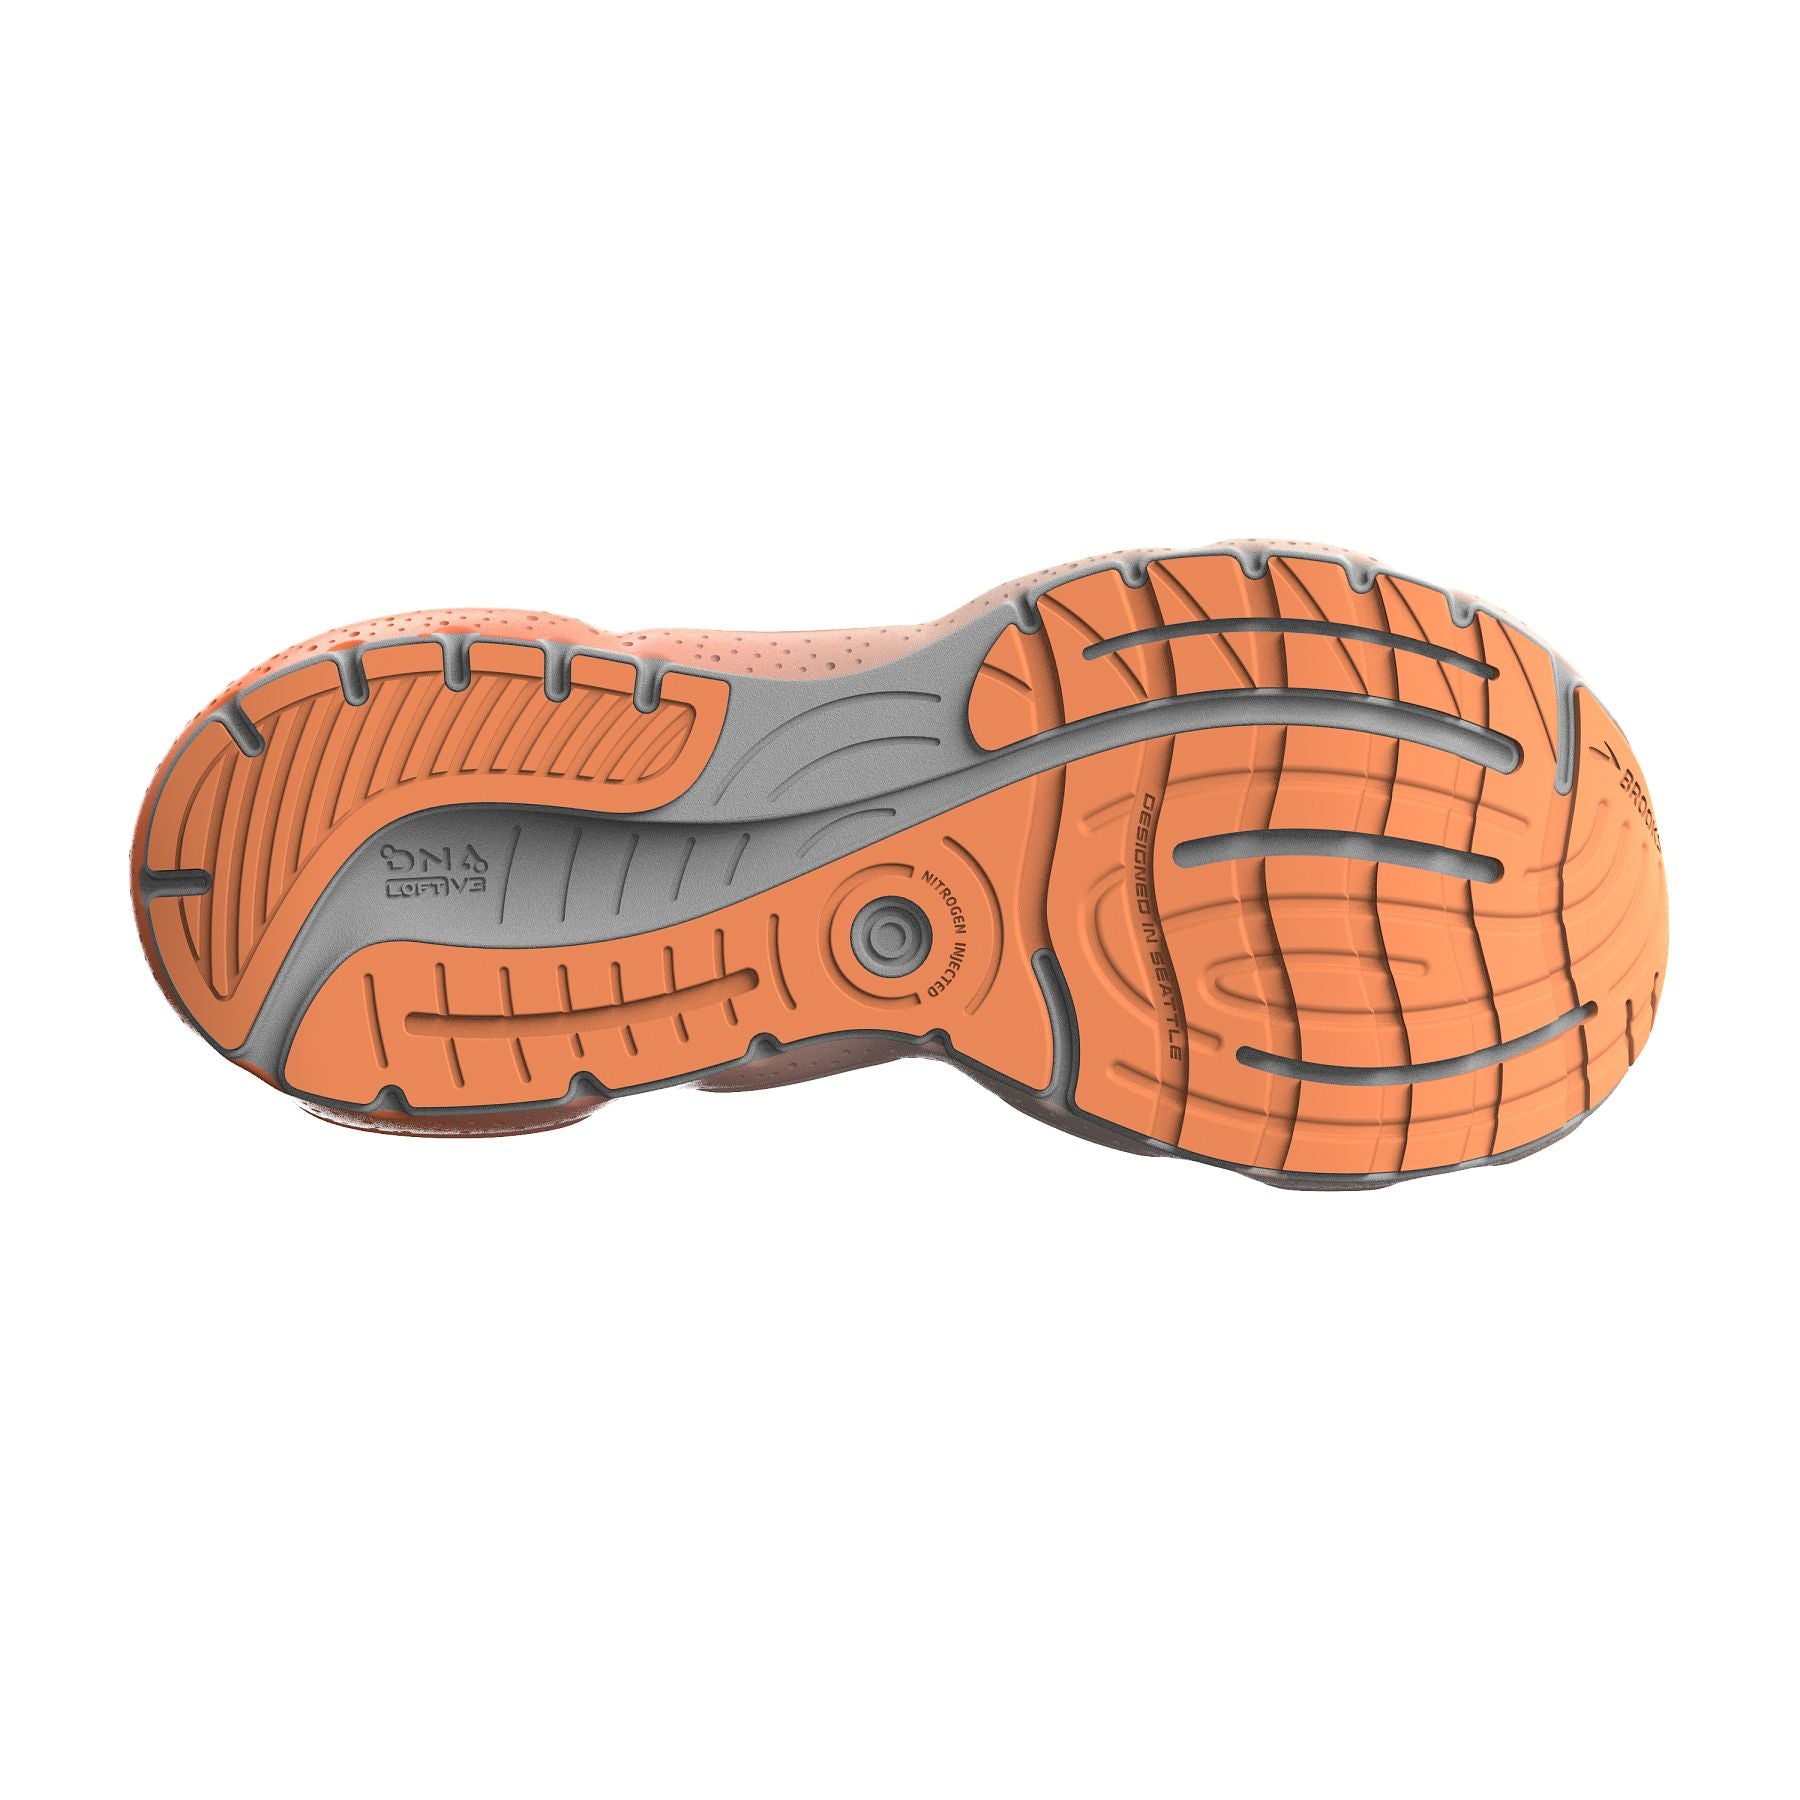 Bottom (outer sole) view of the Women's Glycerin 20 by Brook's in the color Peach/Tangerine/Orange